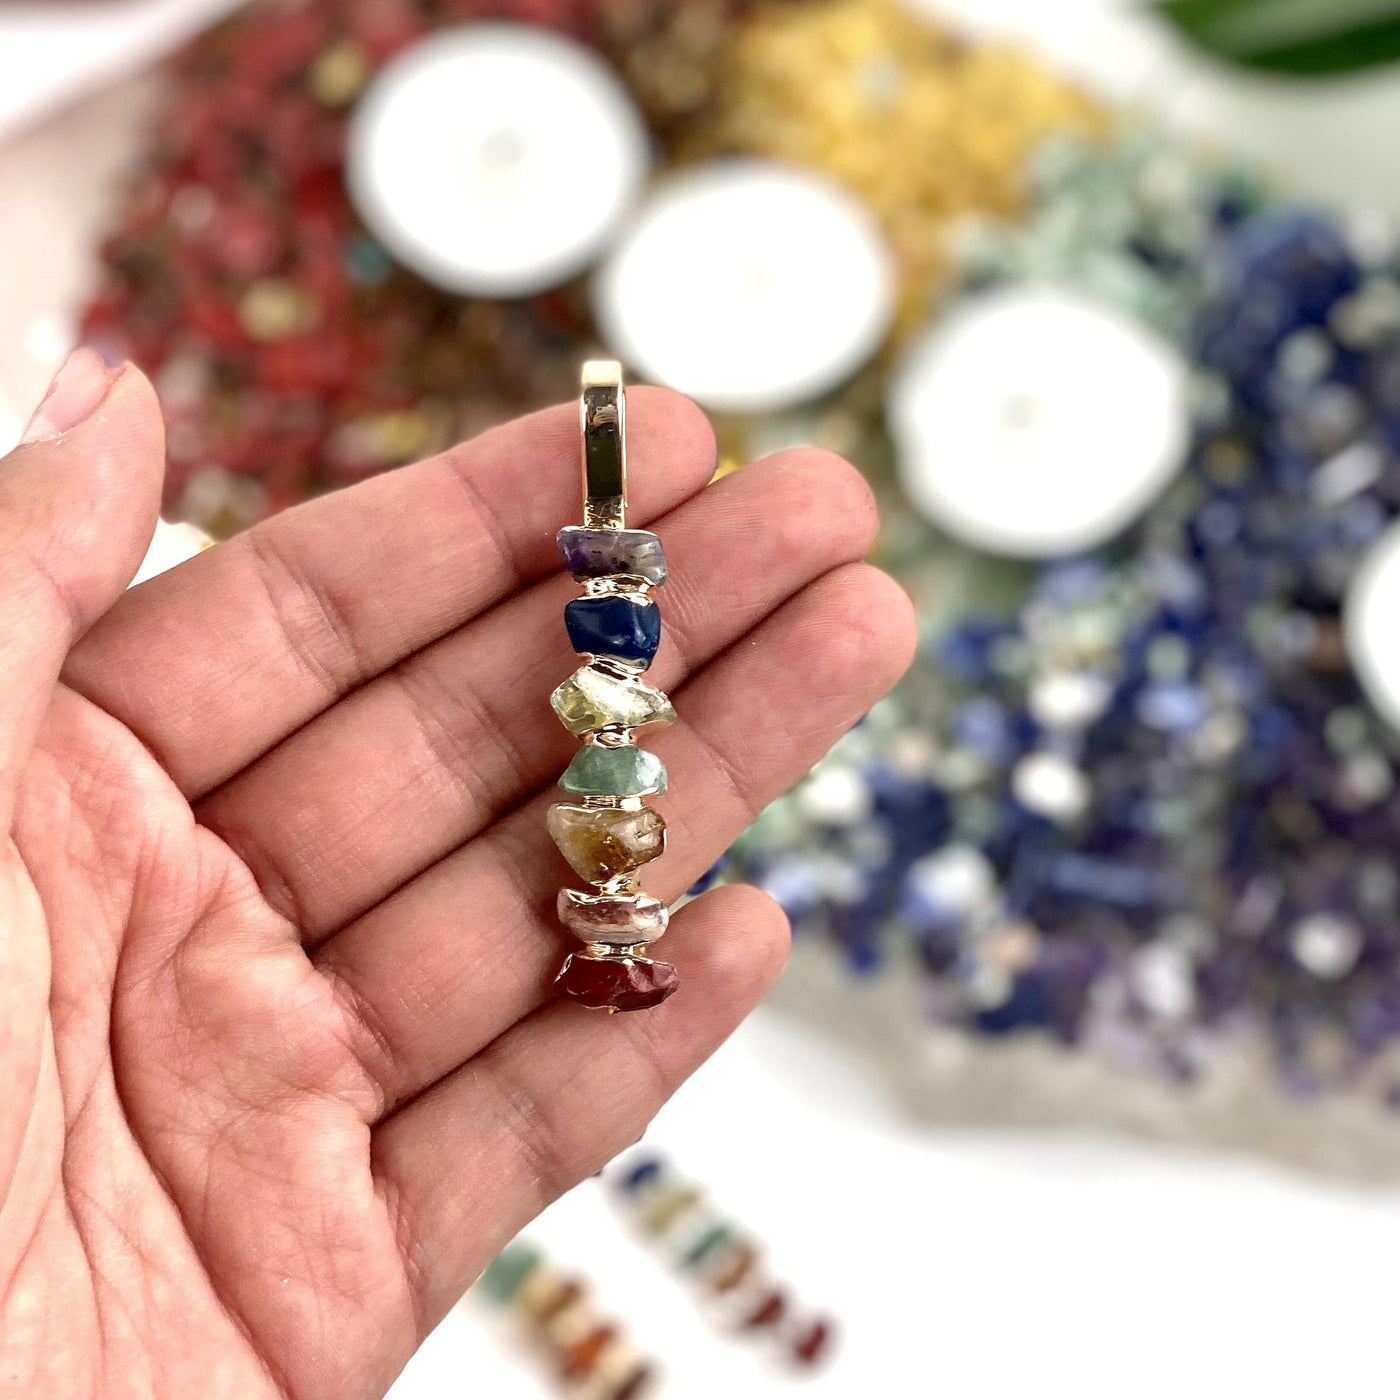 chakra pendant in hand for size reference 